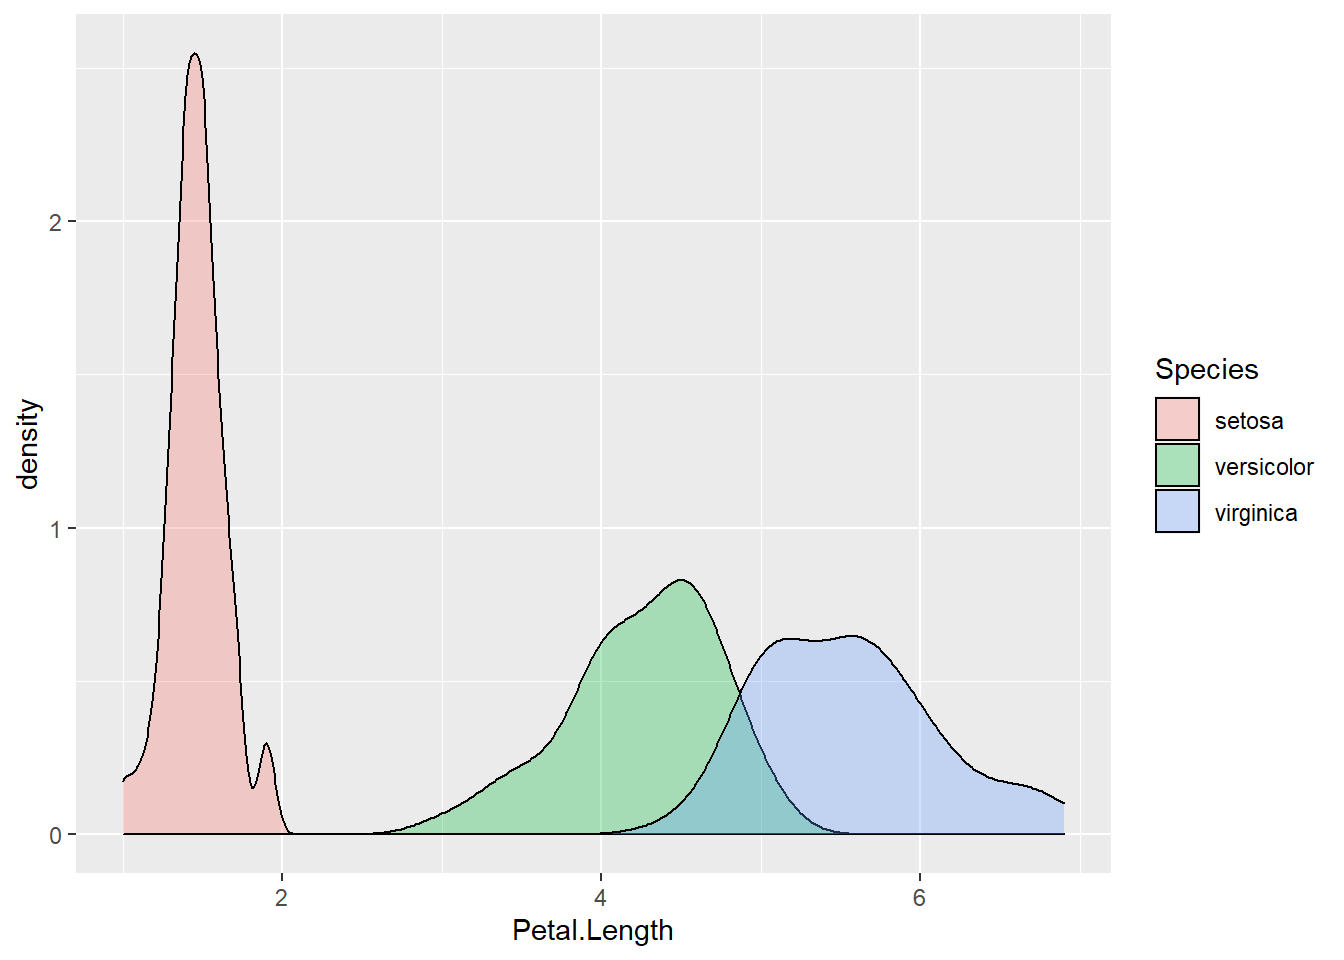 Density plot of petal length, grouped by species.